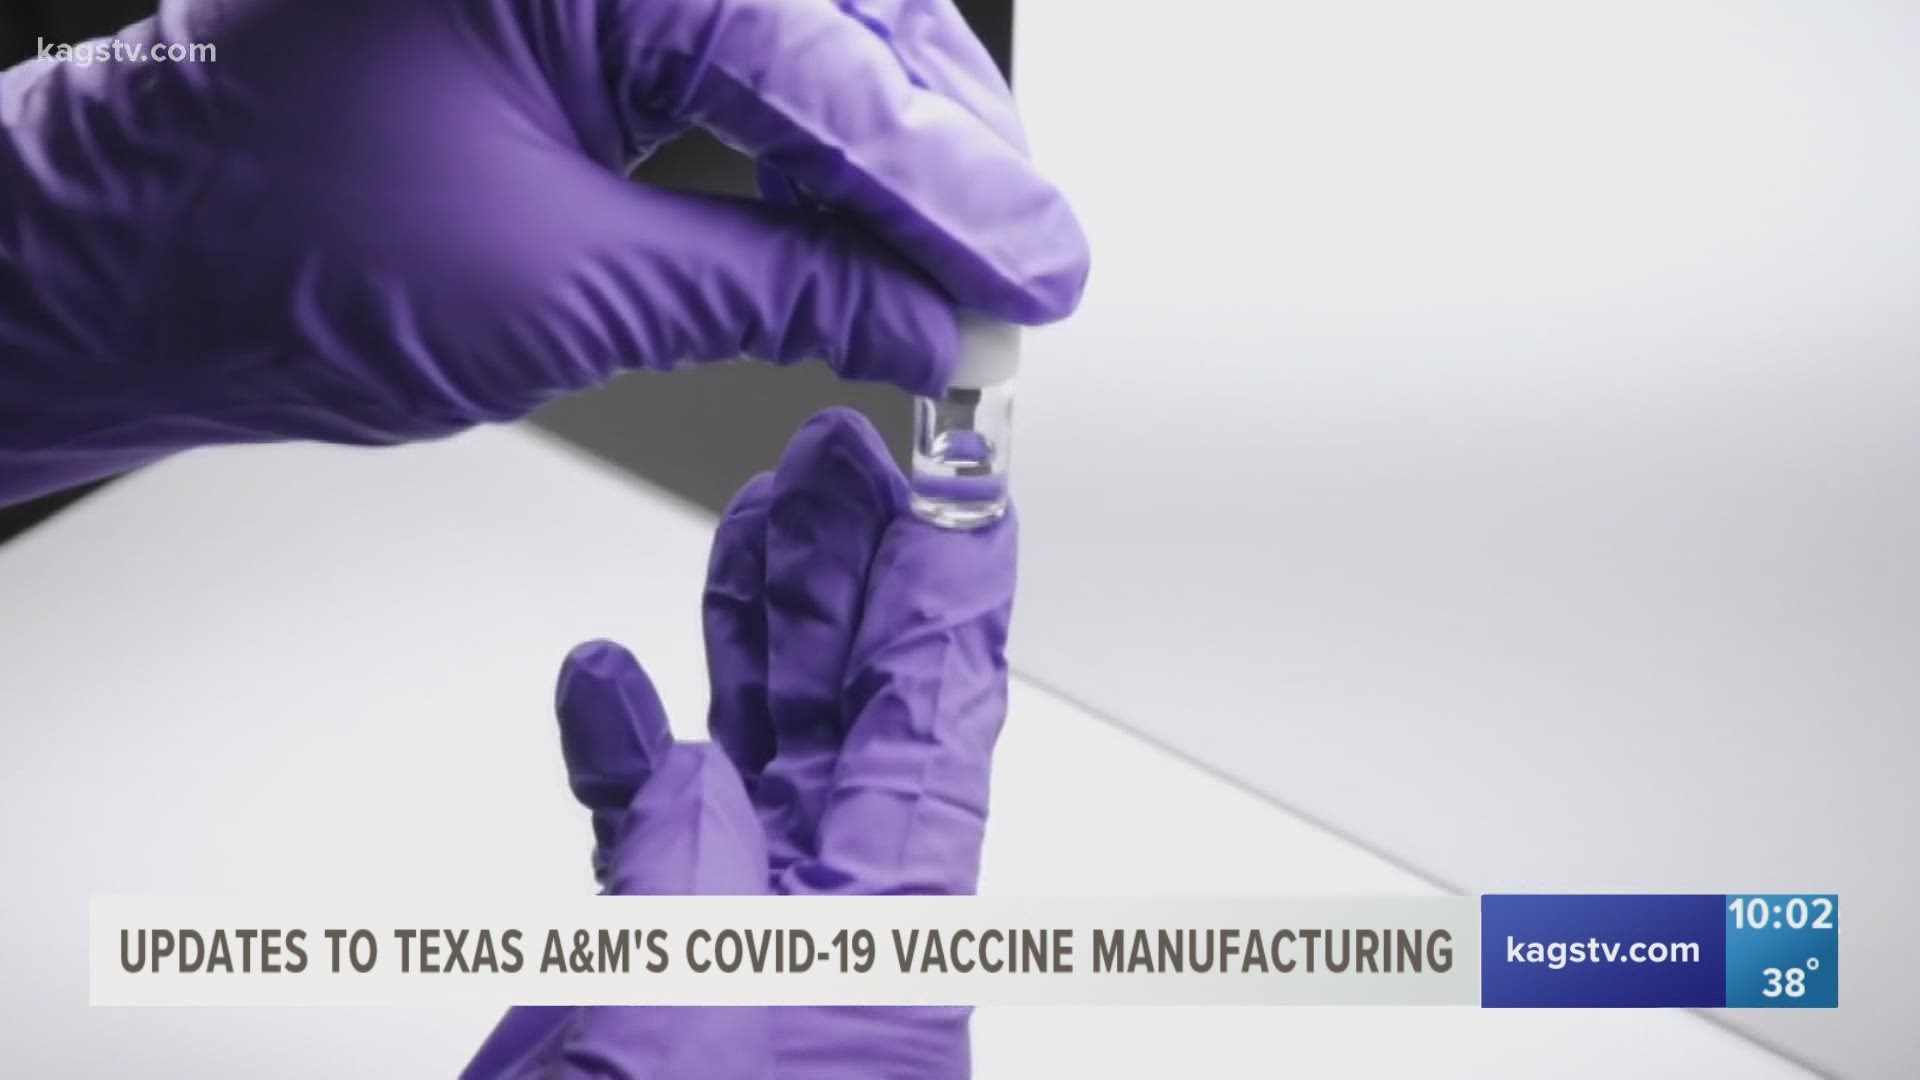 The Novavax vaccine is currently in phase three clinical testing and production has begun for a second COVID-19 vaccine candidate in College Station.